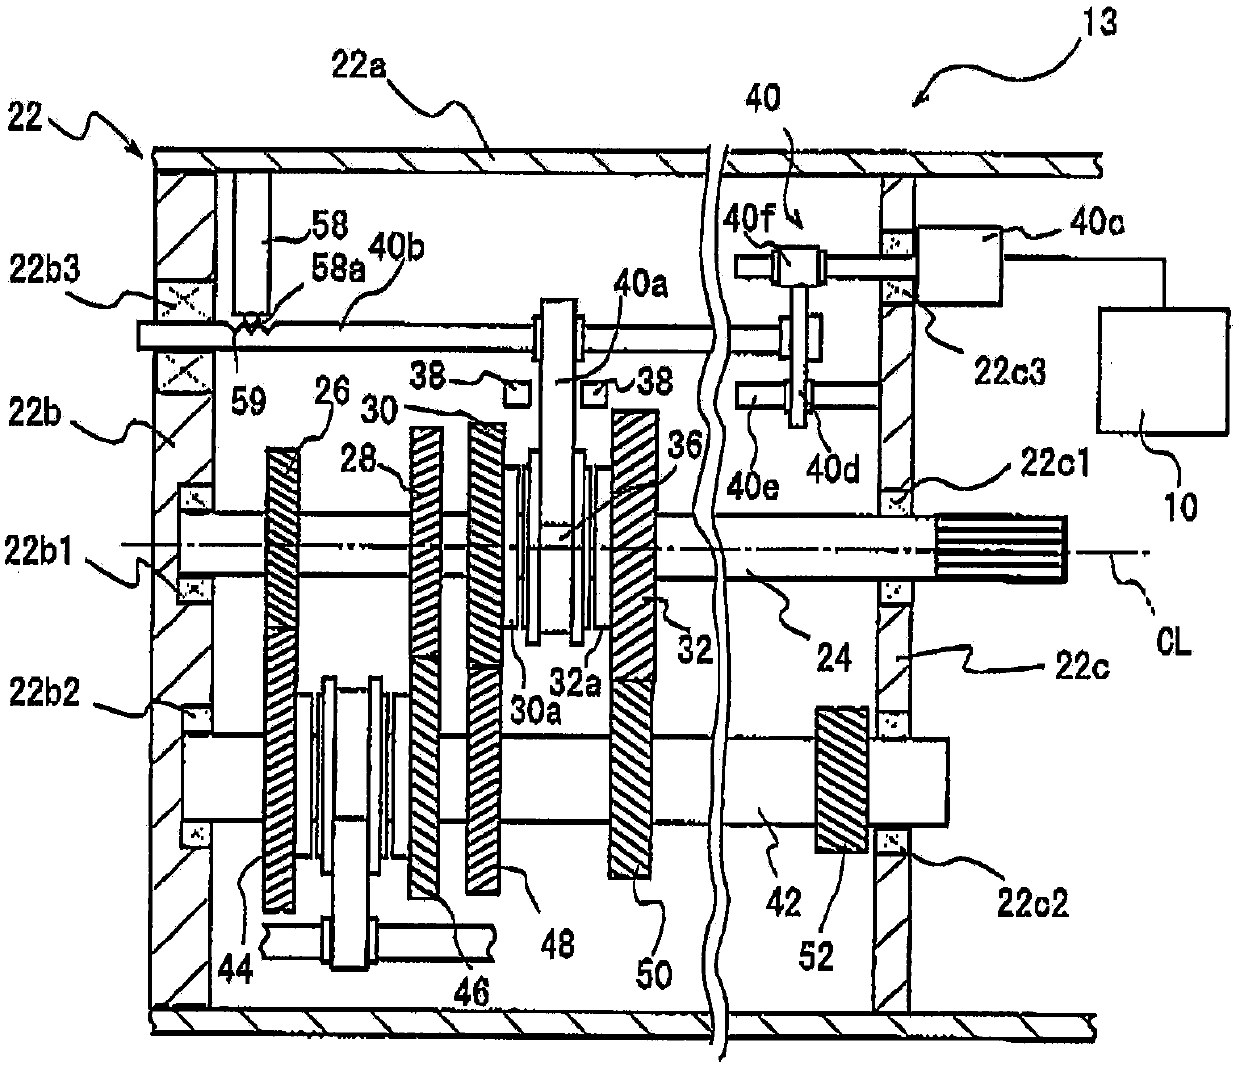 Dog clutch control apparatus for automated transmission